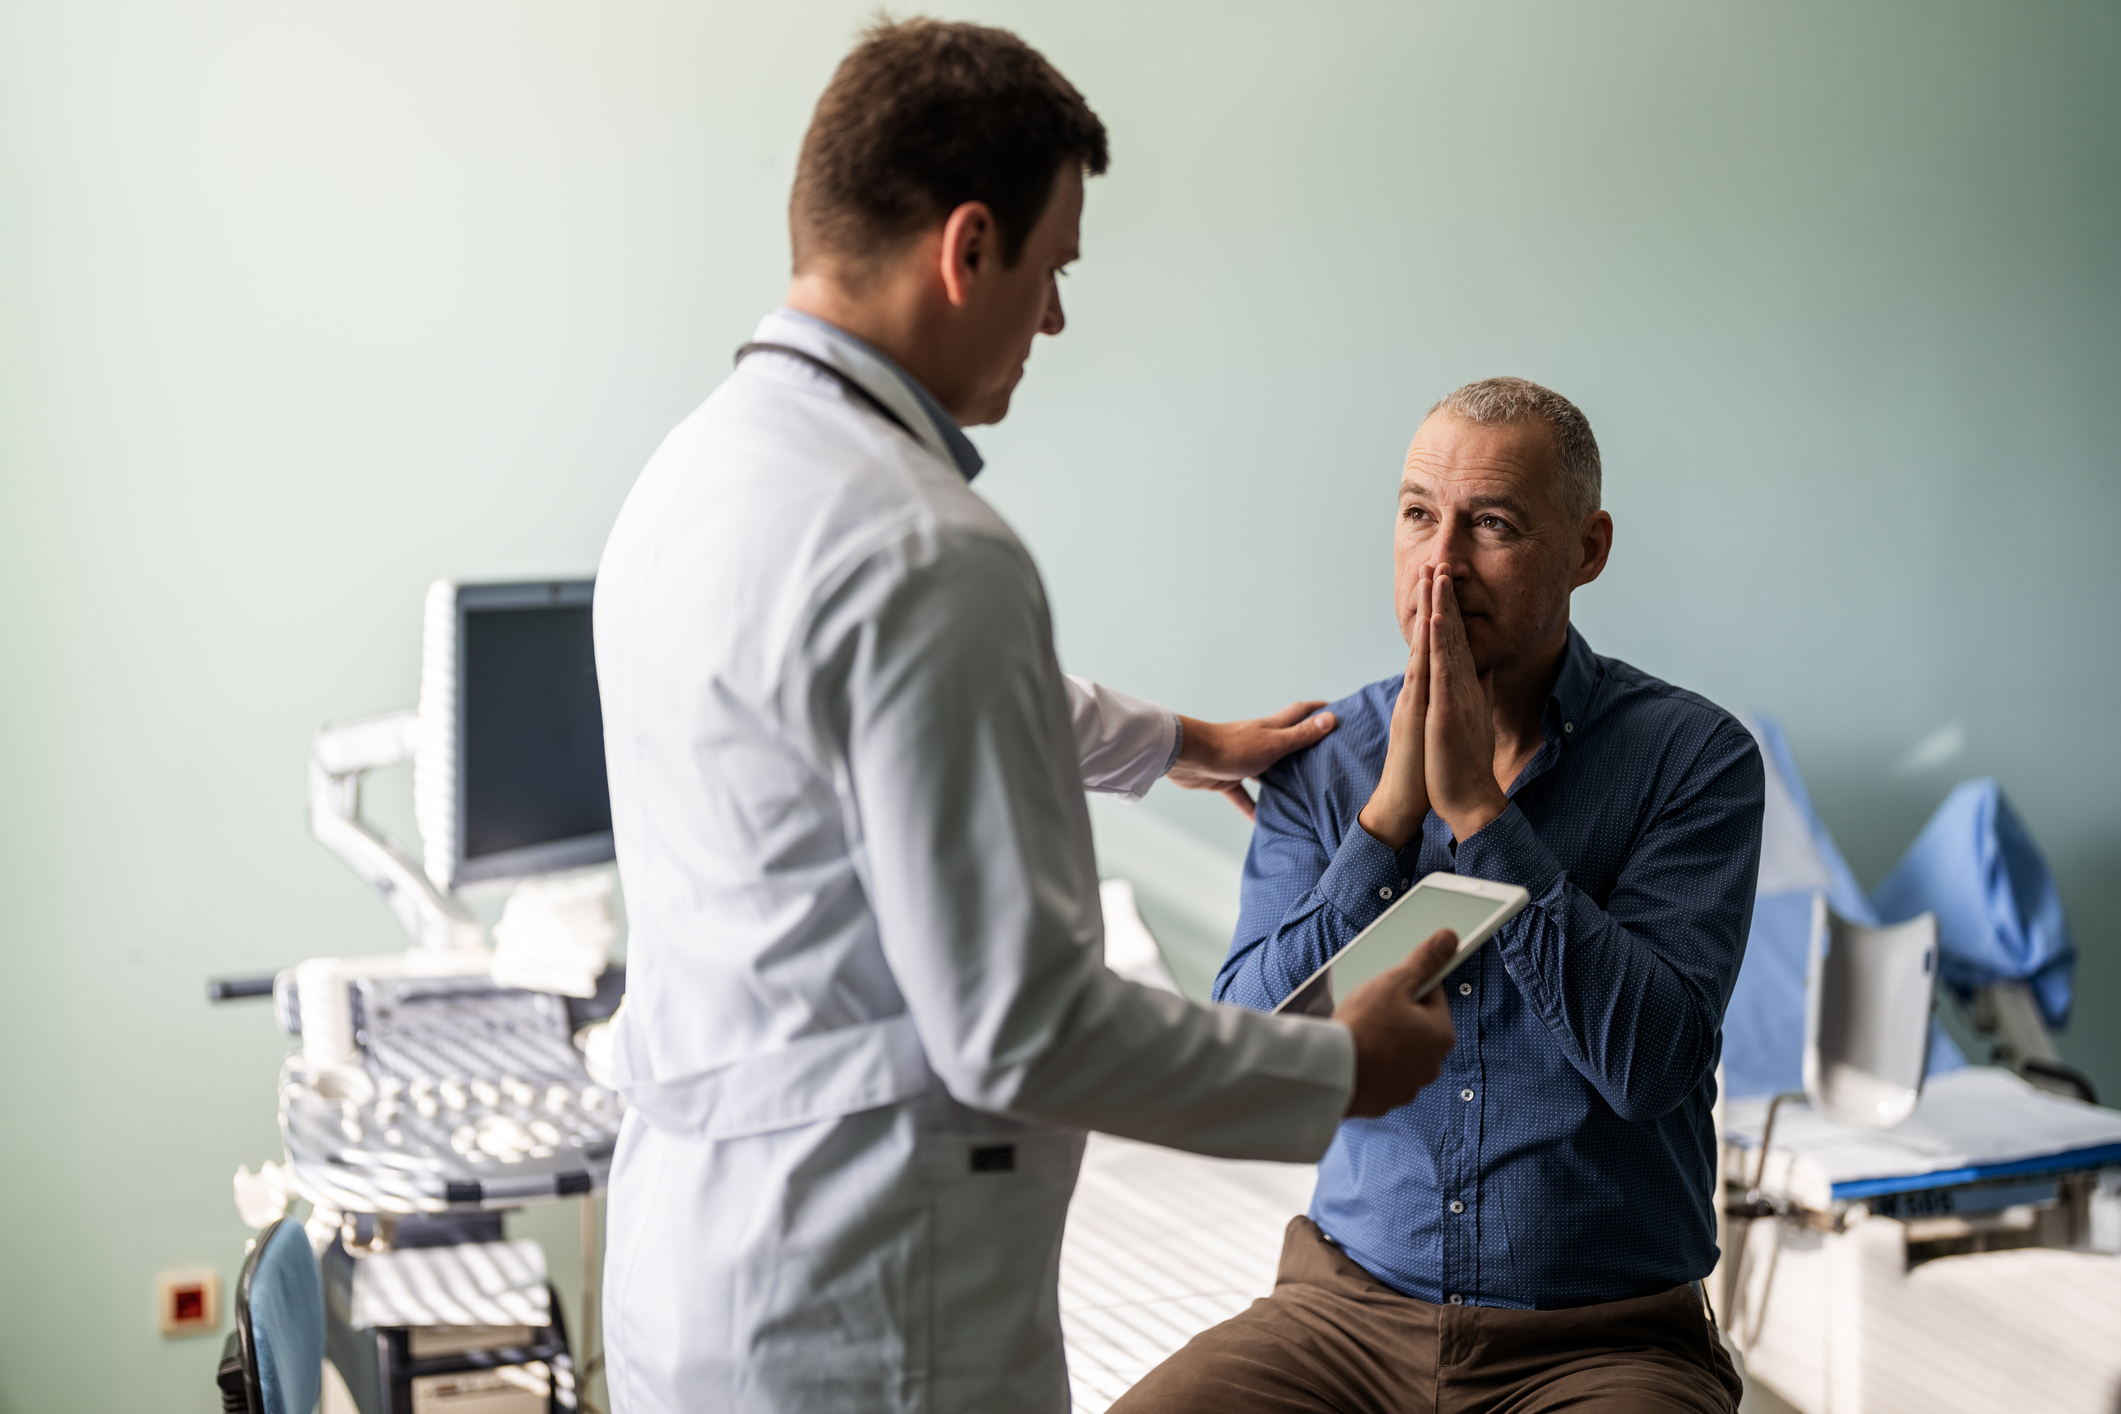 Doctor consulting with patient showing concern, both are gesturing with their hands, in a medical office setting